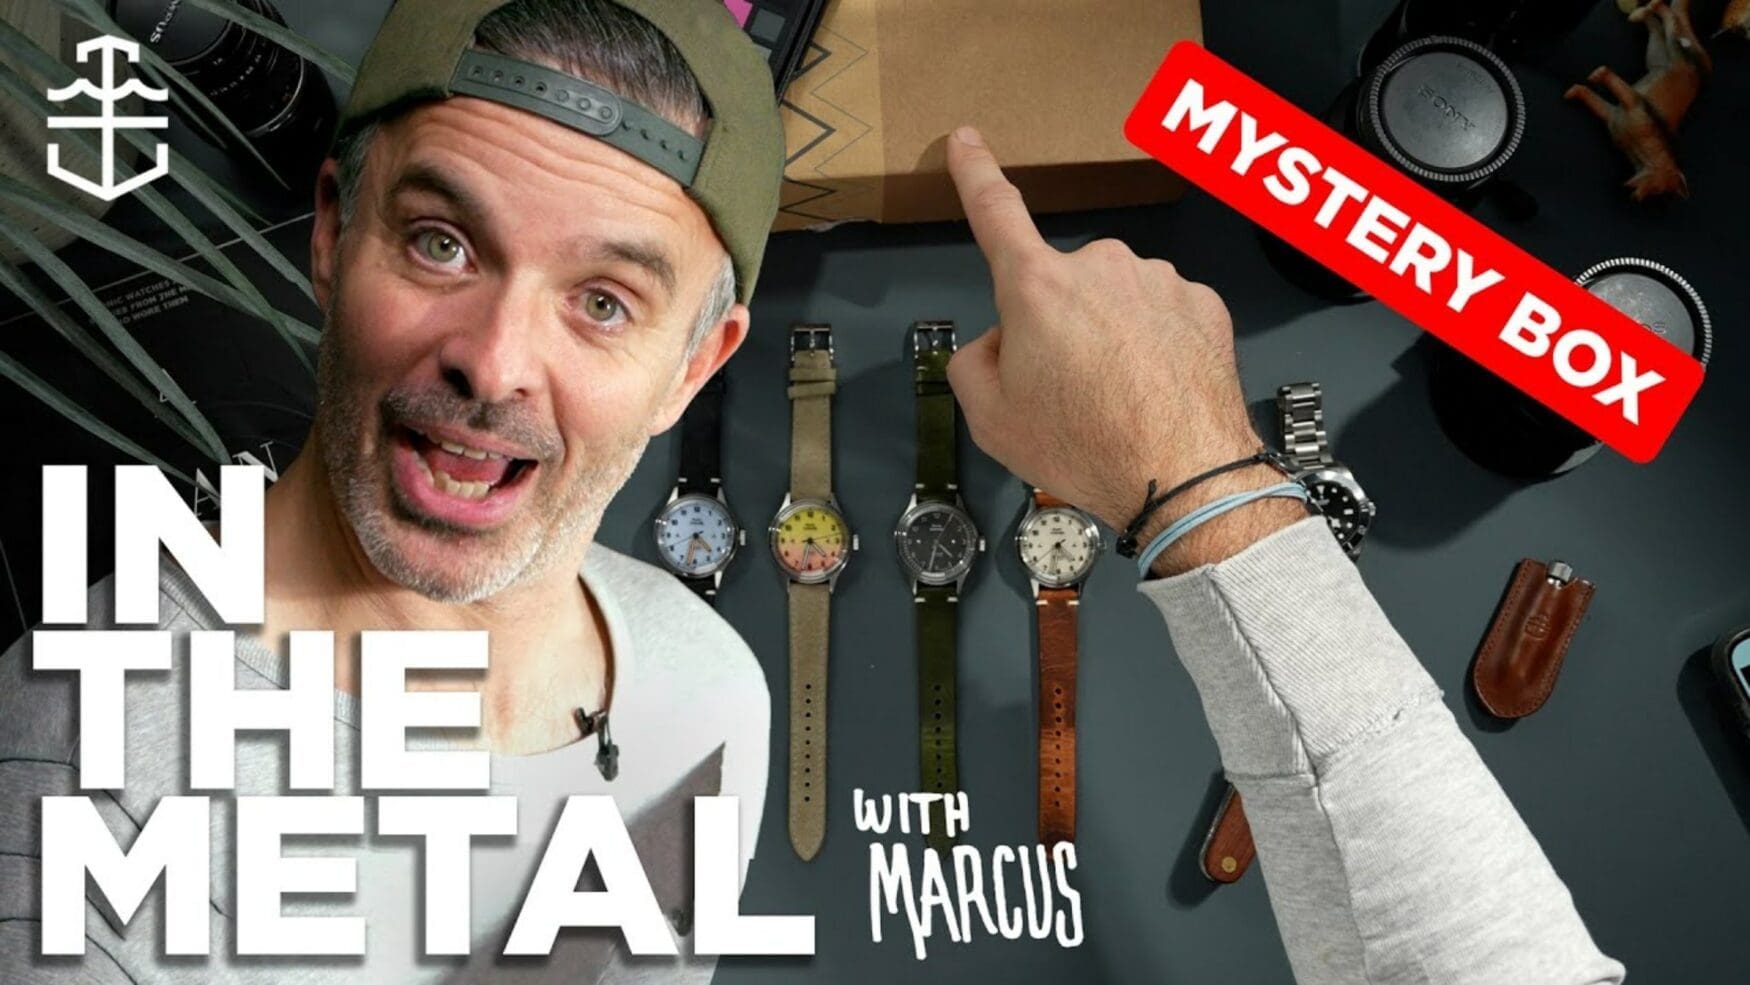 Welcome to In The Metal – a distinctly Marcus take on all things watches